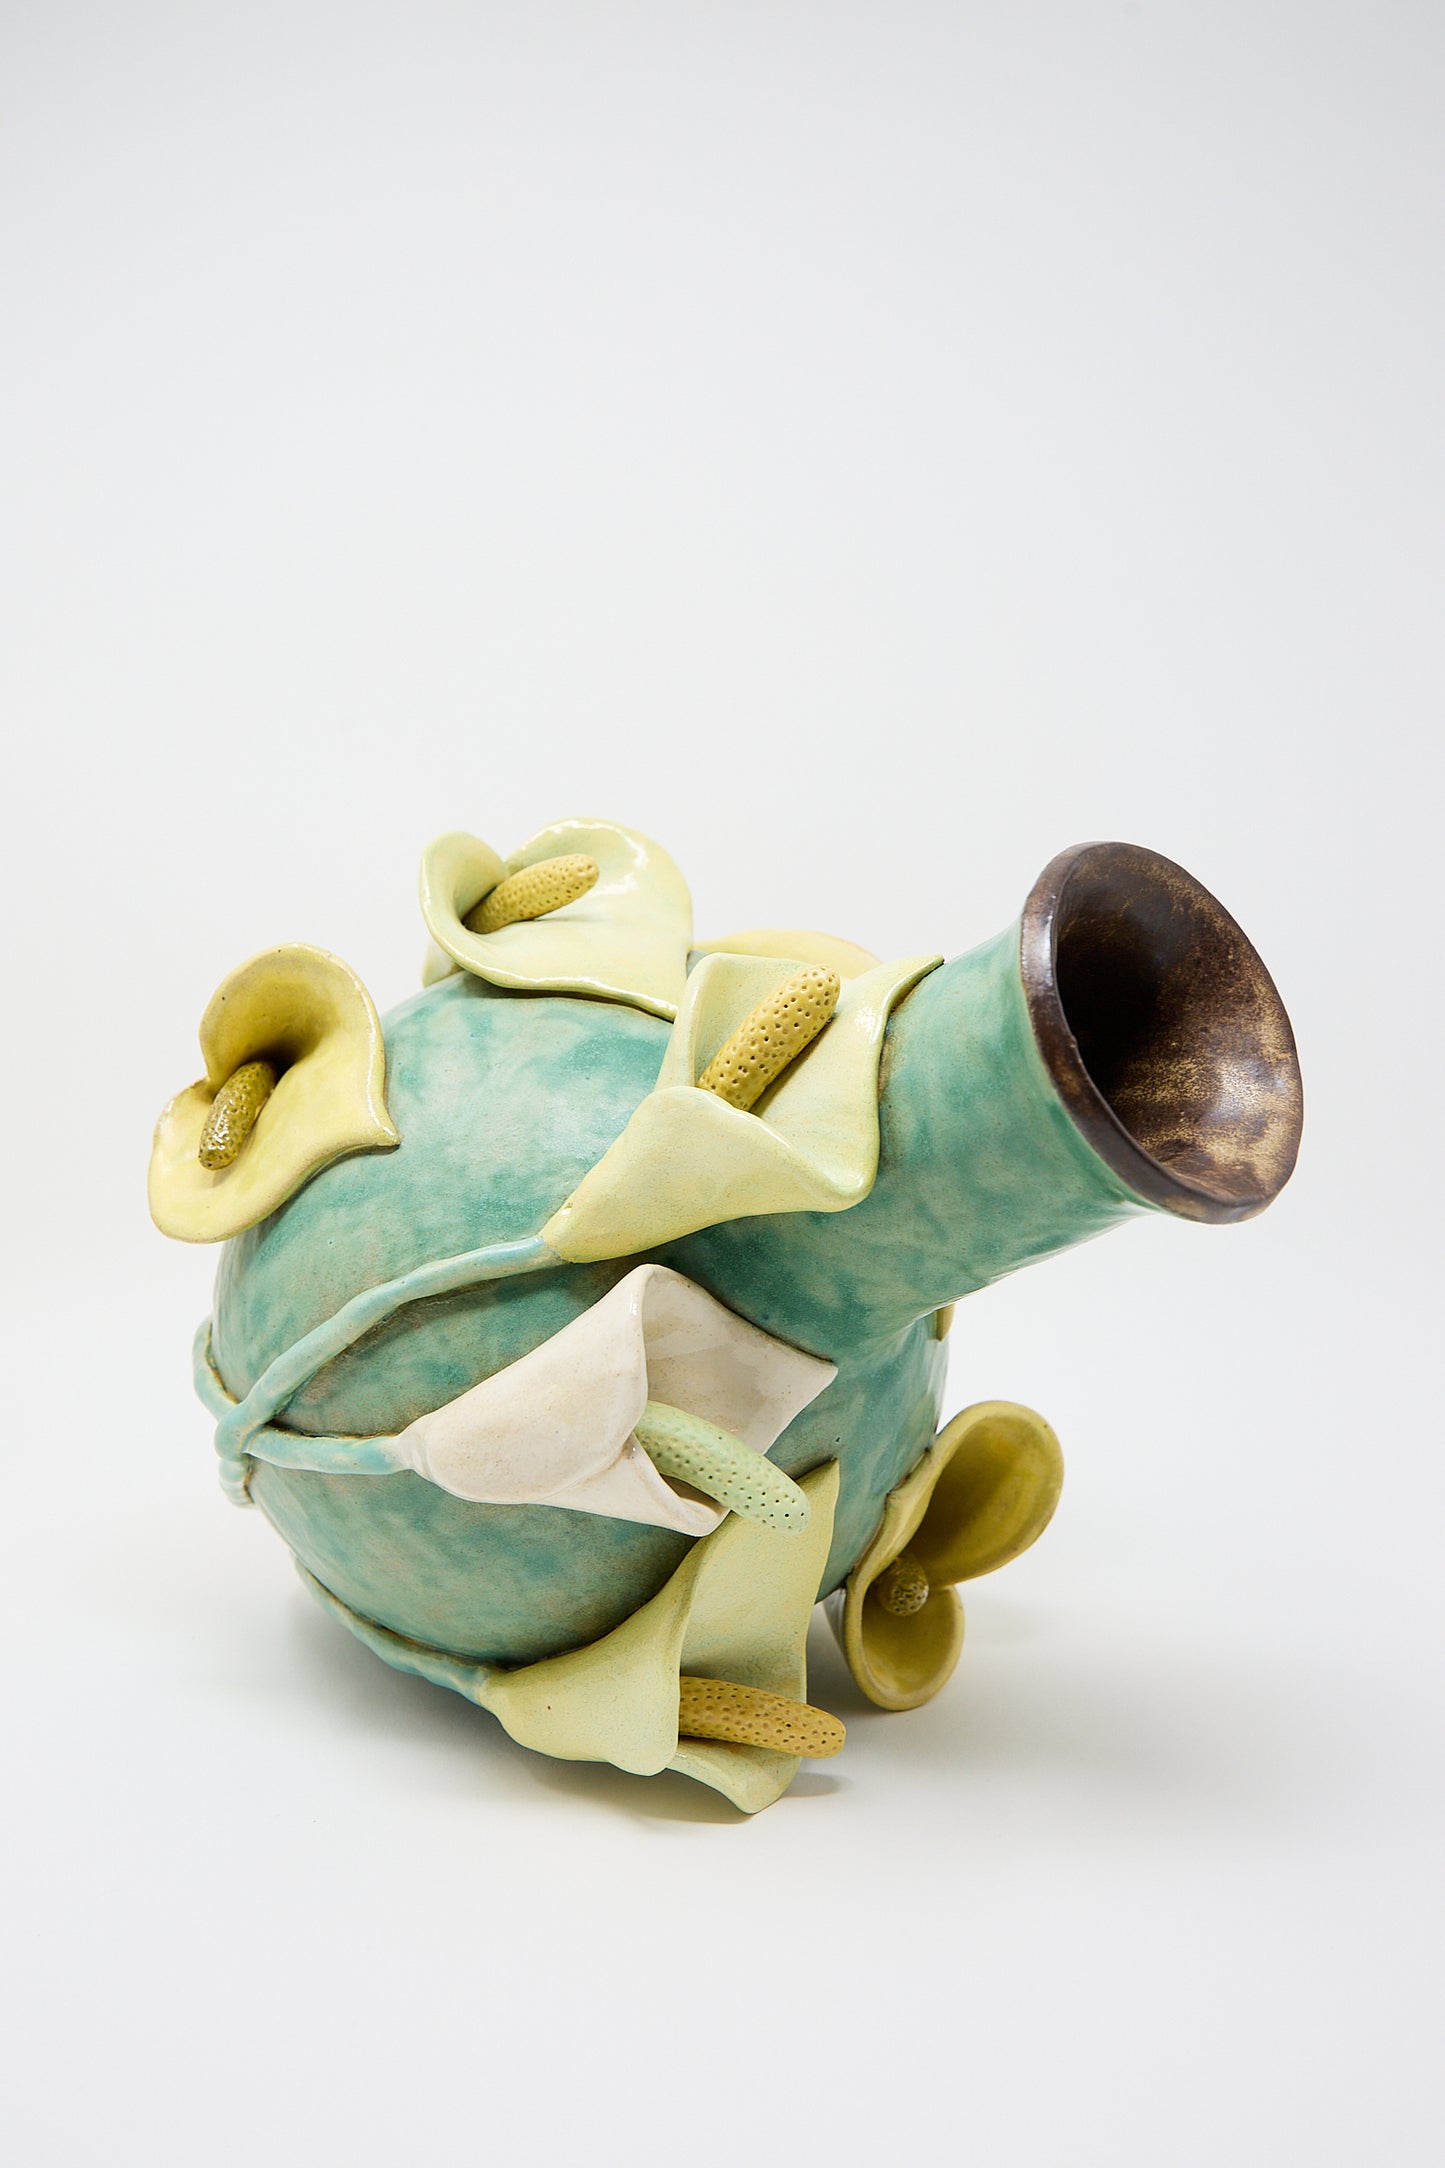 A sculpted ceramic teapot designed to resemble a cluster of Calla lilies, featuring a dark brown rimmed spout by Pearce Williams.